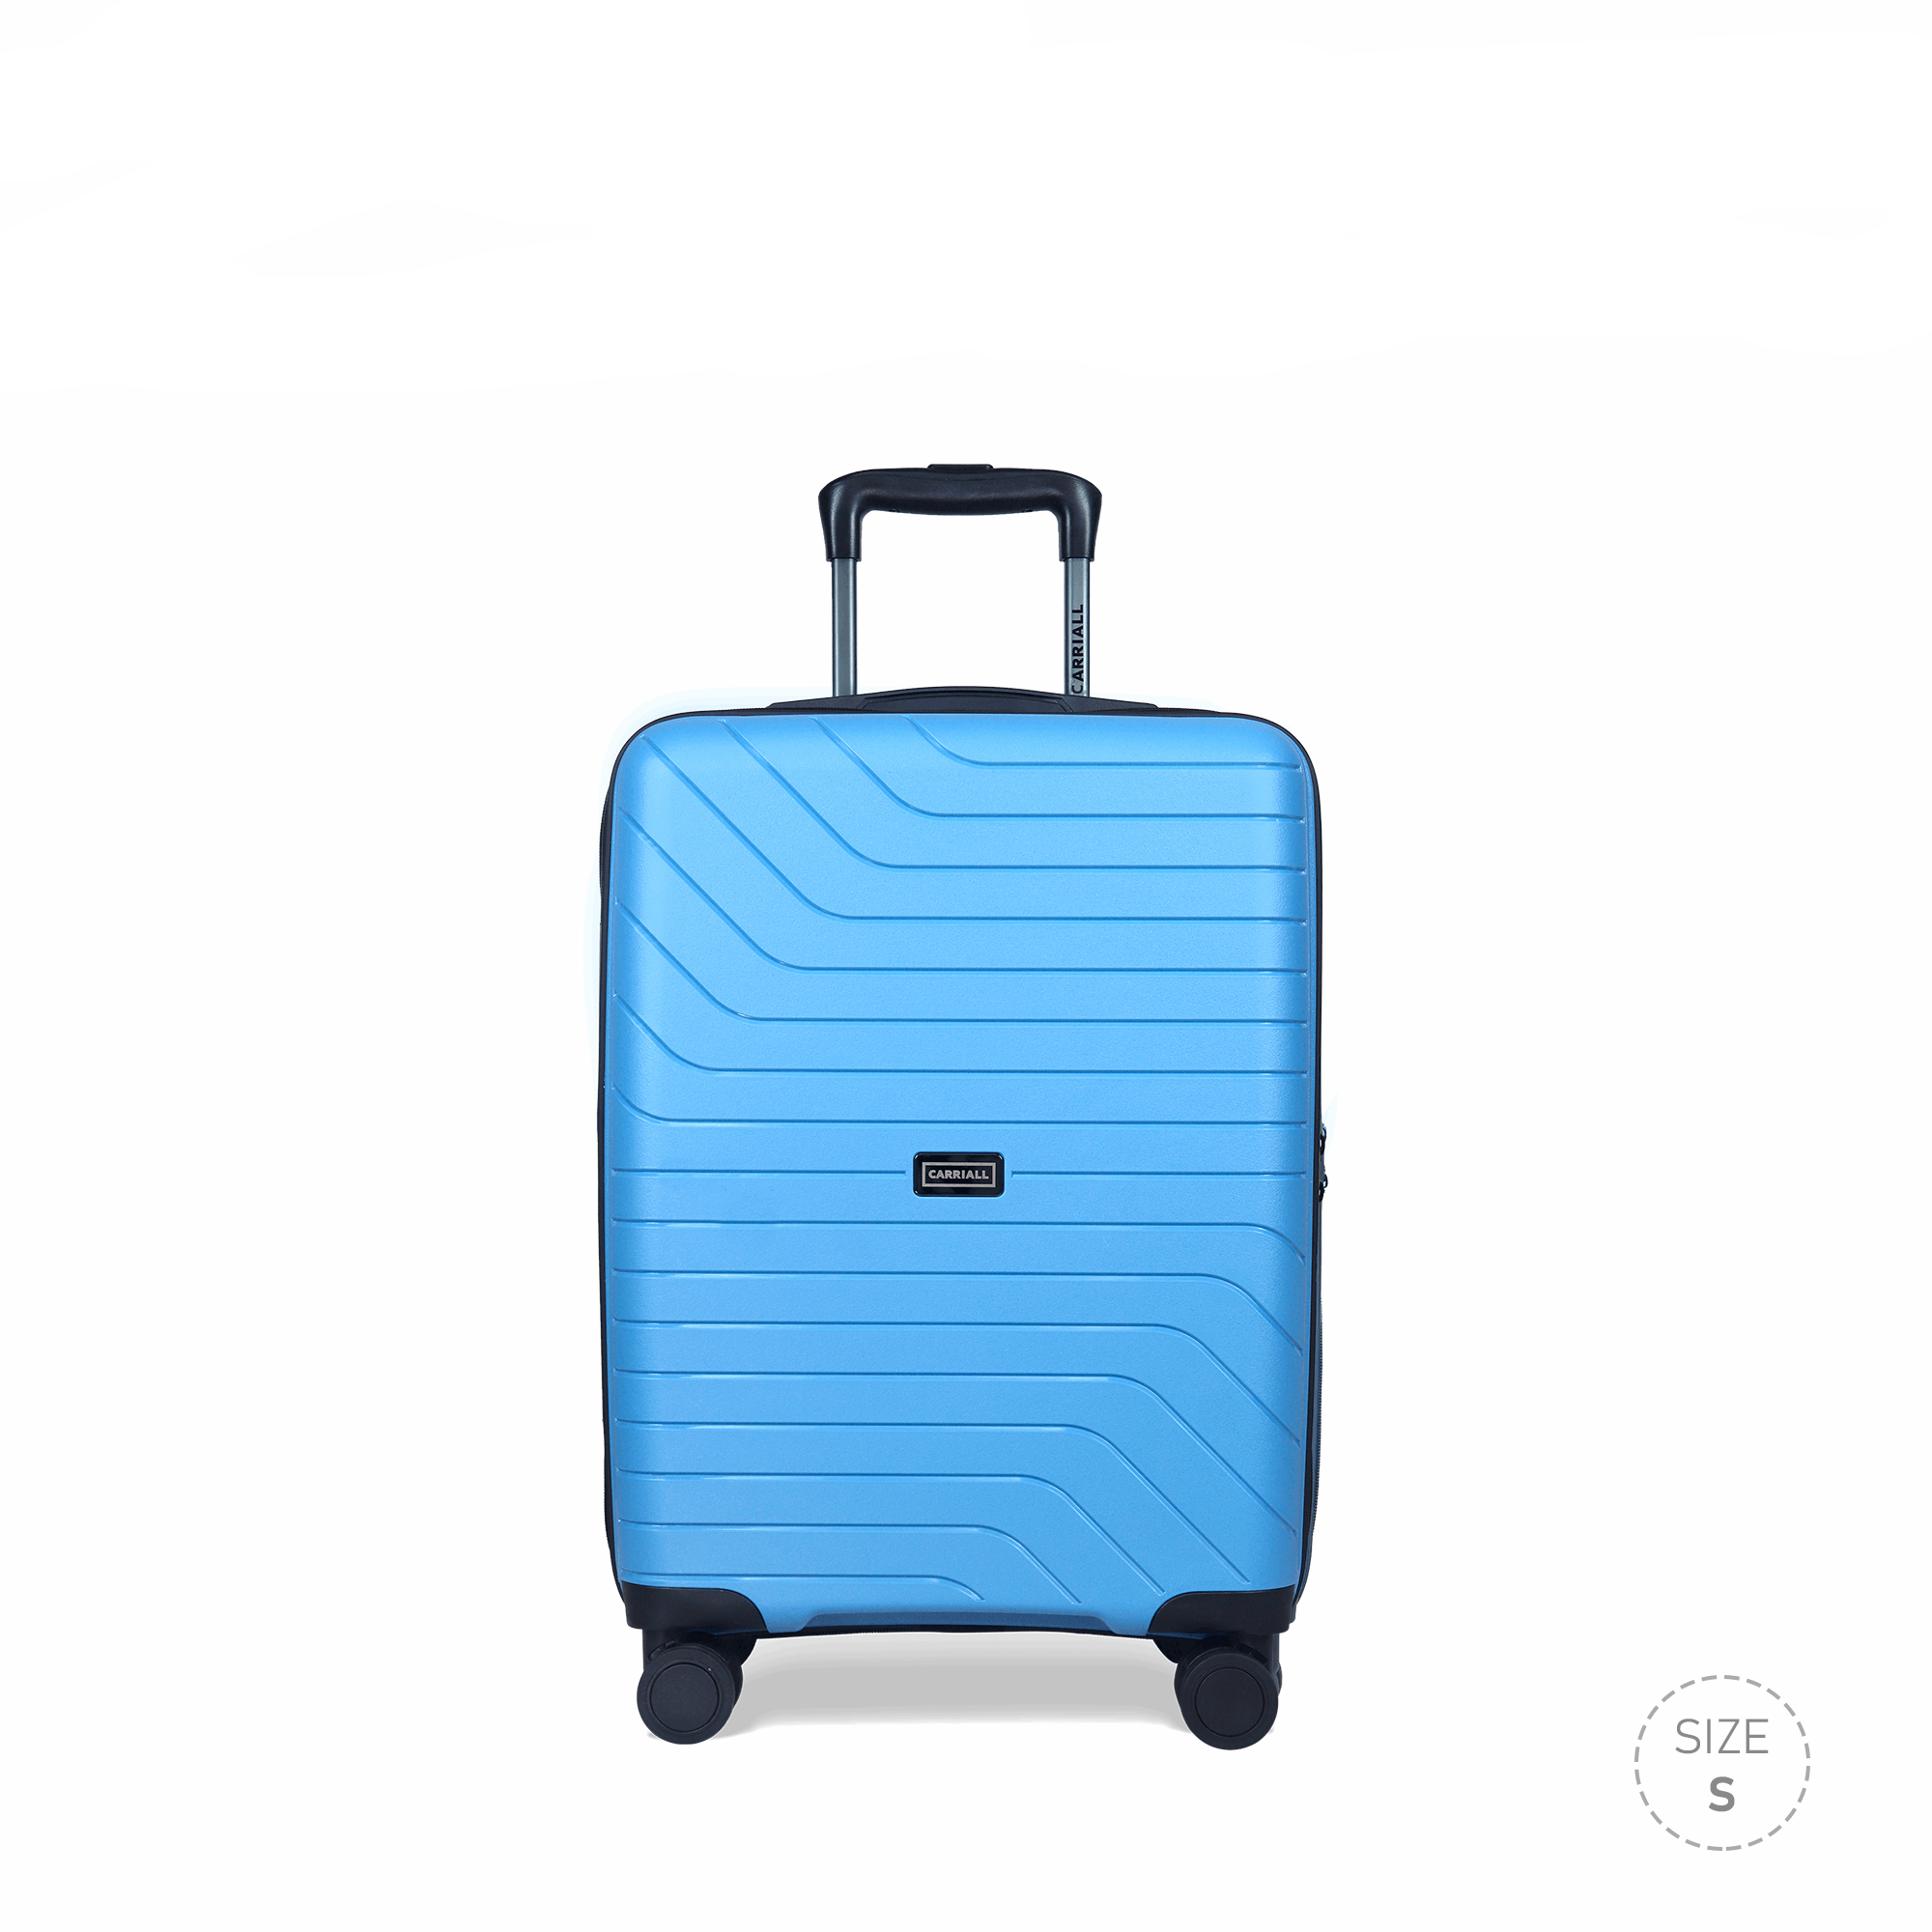 Groove Luggage, luggage, suitcase, bag. carriall, smart luggage